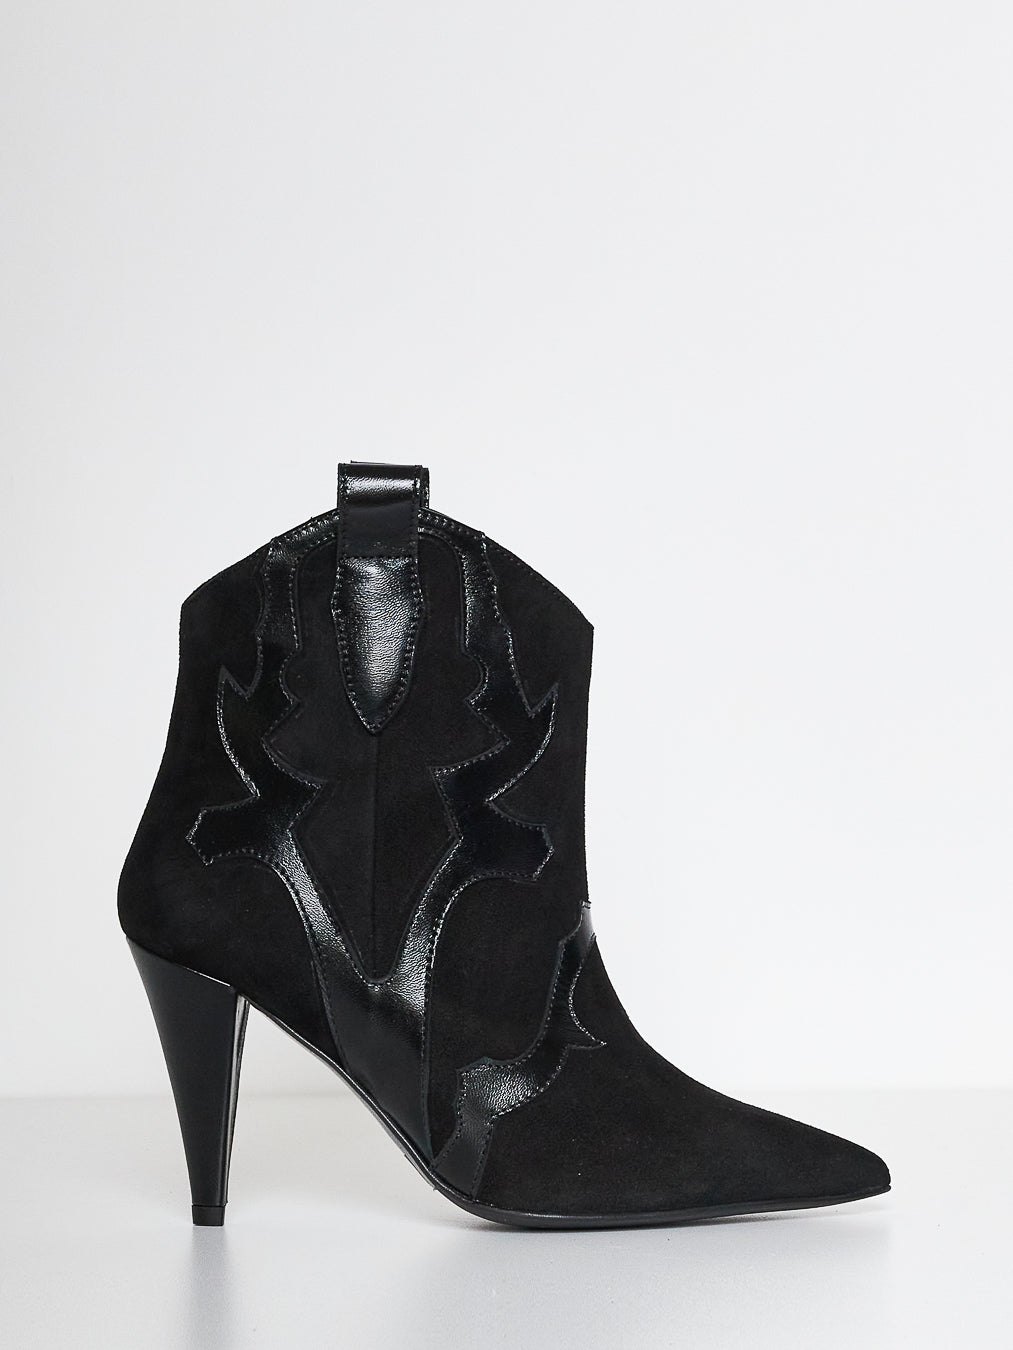 Marc Ellis MT 240 black ankle boot with patent embroidery